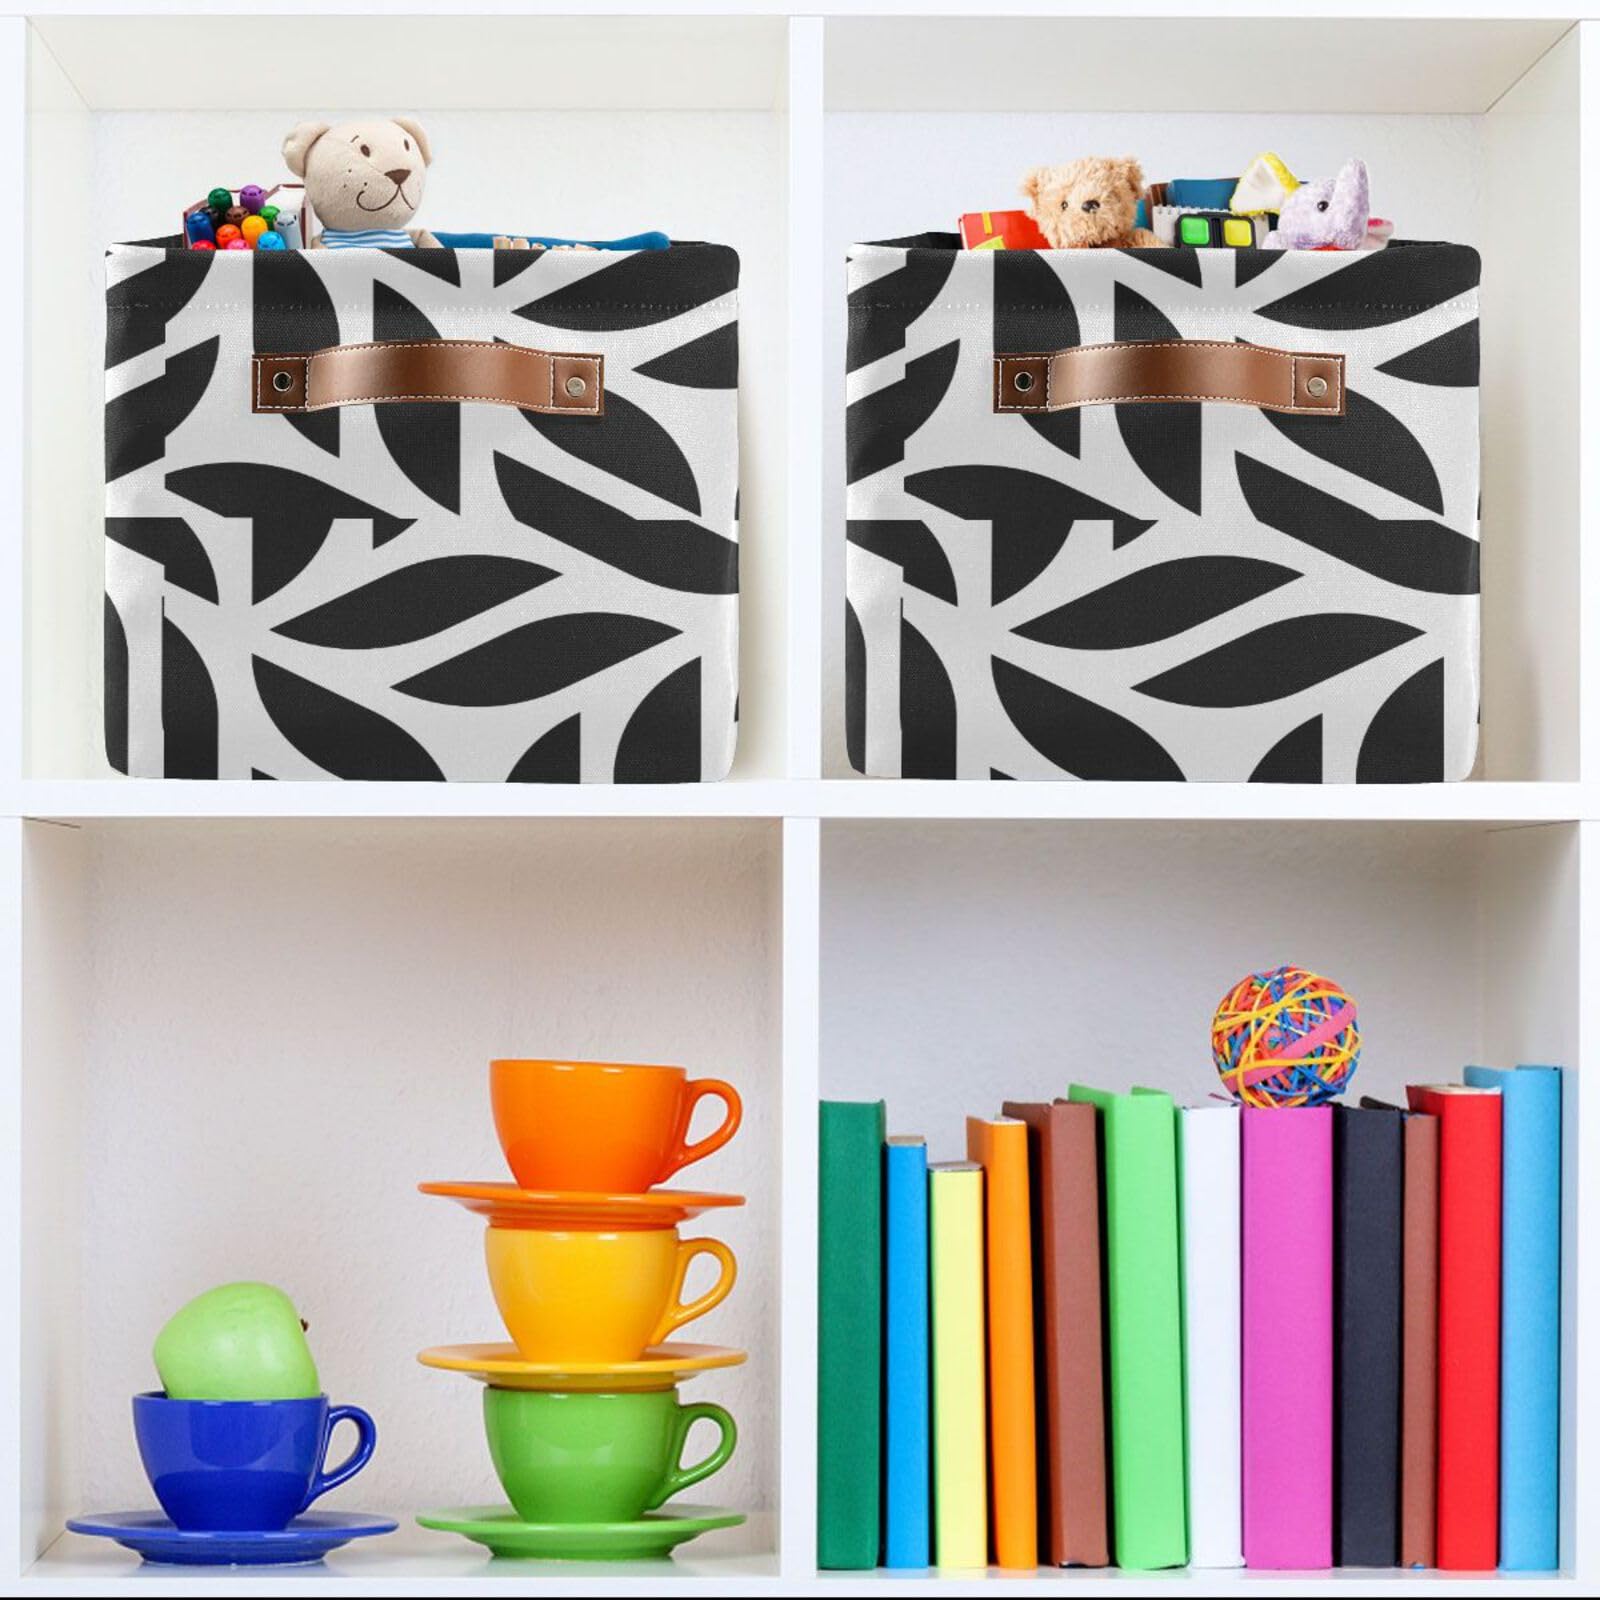 Geometric Tiles Striped Storage Basket Bins Foldable Toy Baskets Organization with Handles Laundry Hamper for Office Bedroom Clothes Bedroom Living Room,1 pcs